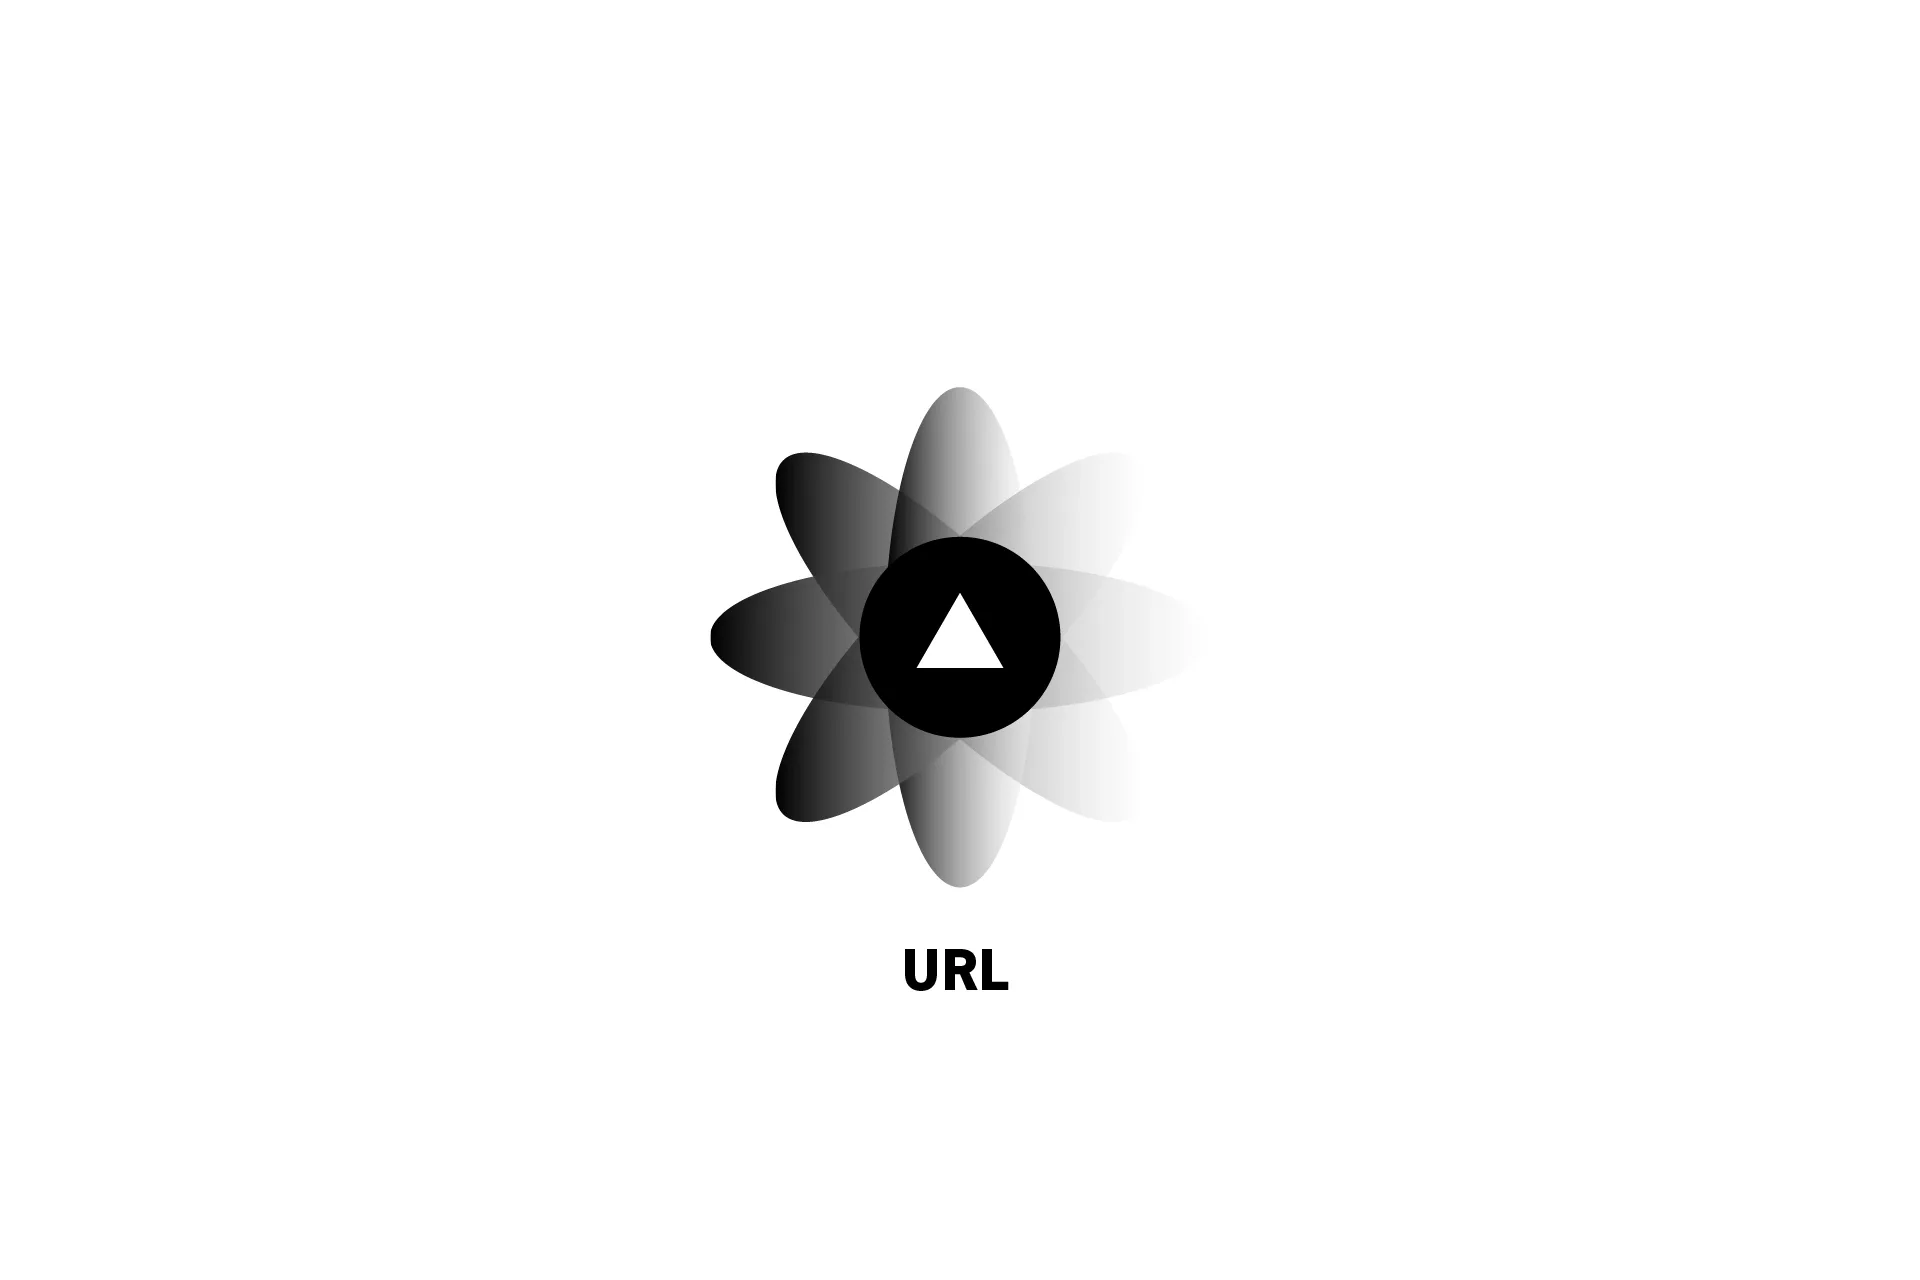 A flower that represents Vercel with the text "URL” beneath it.